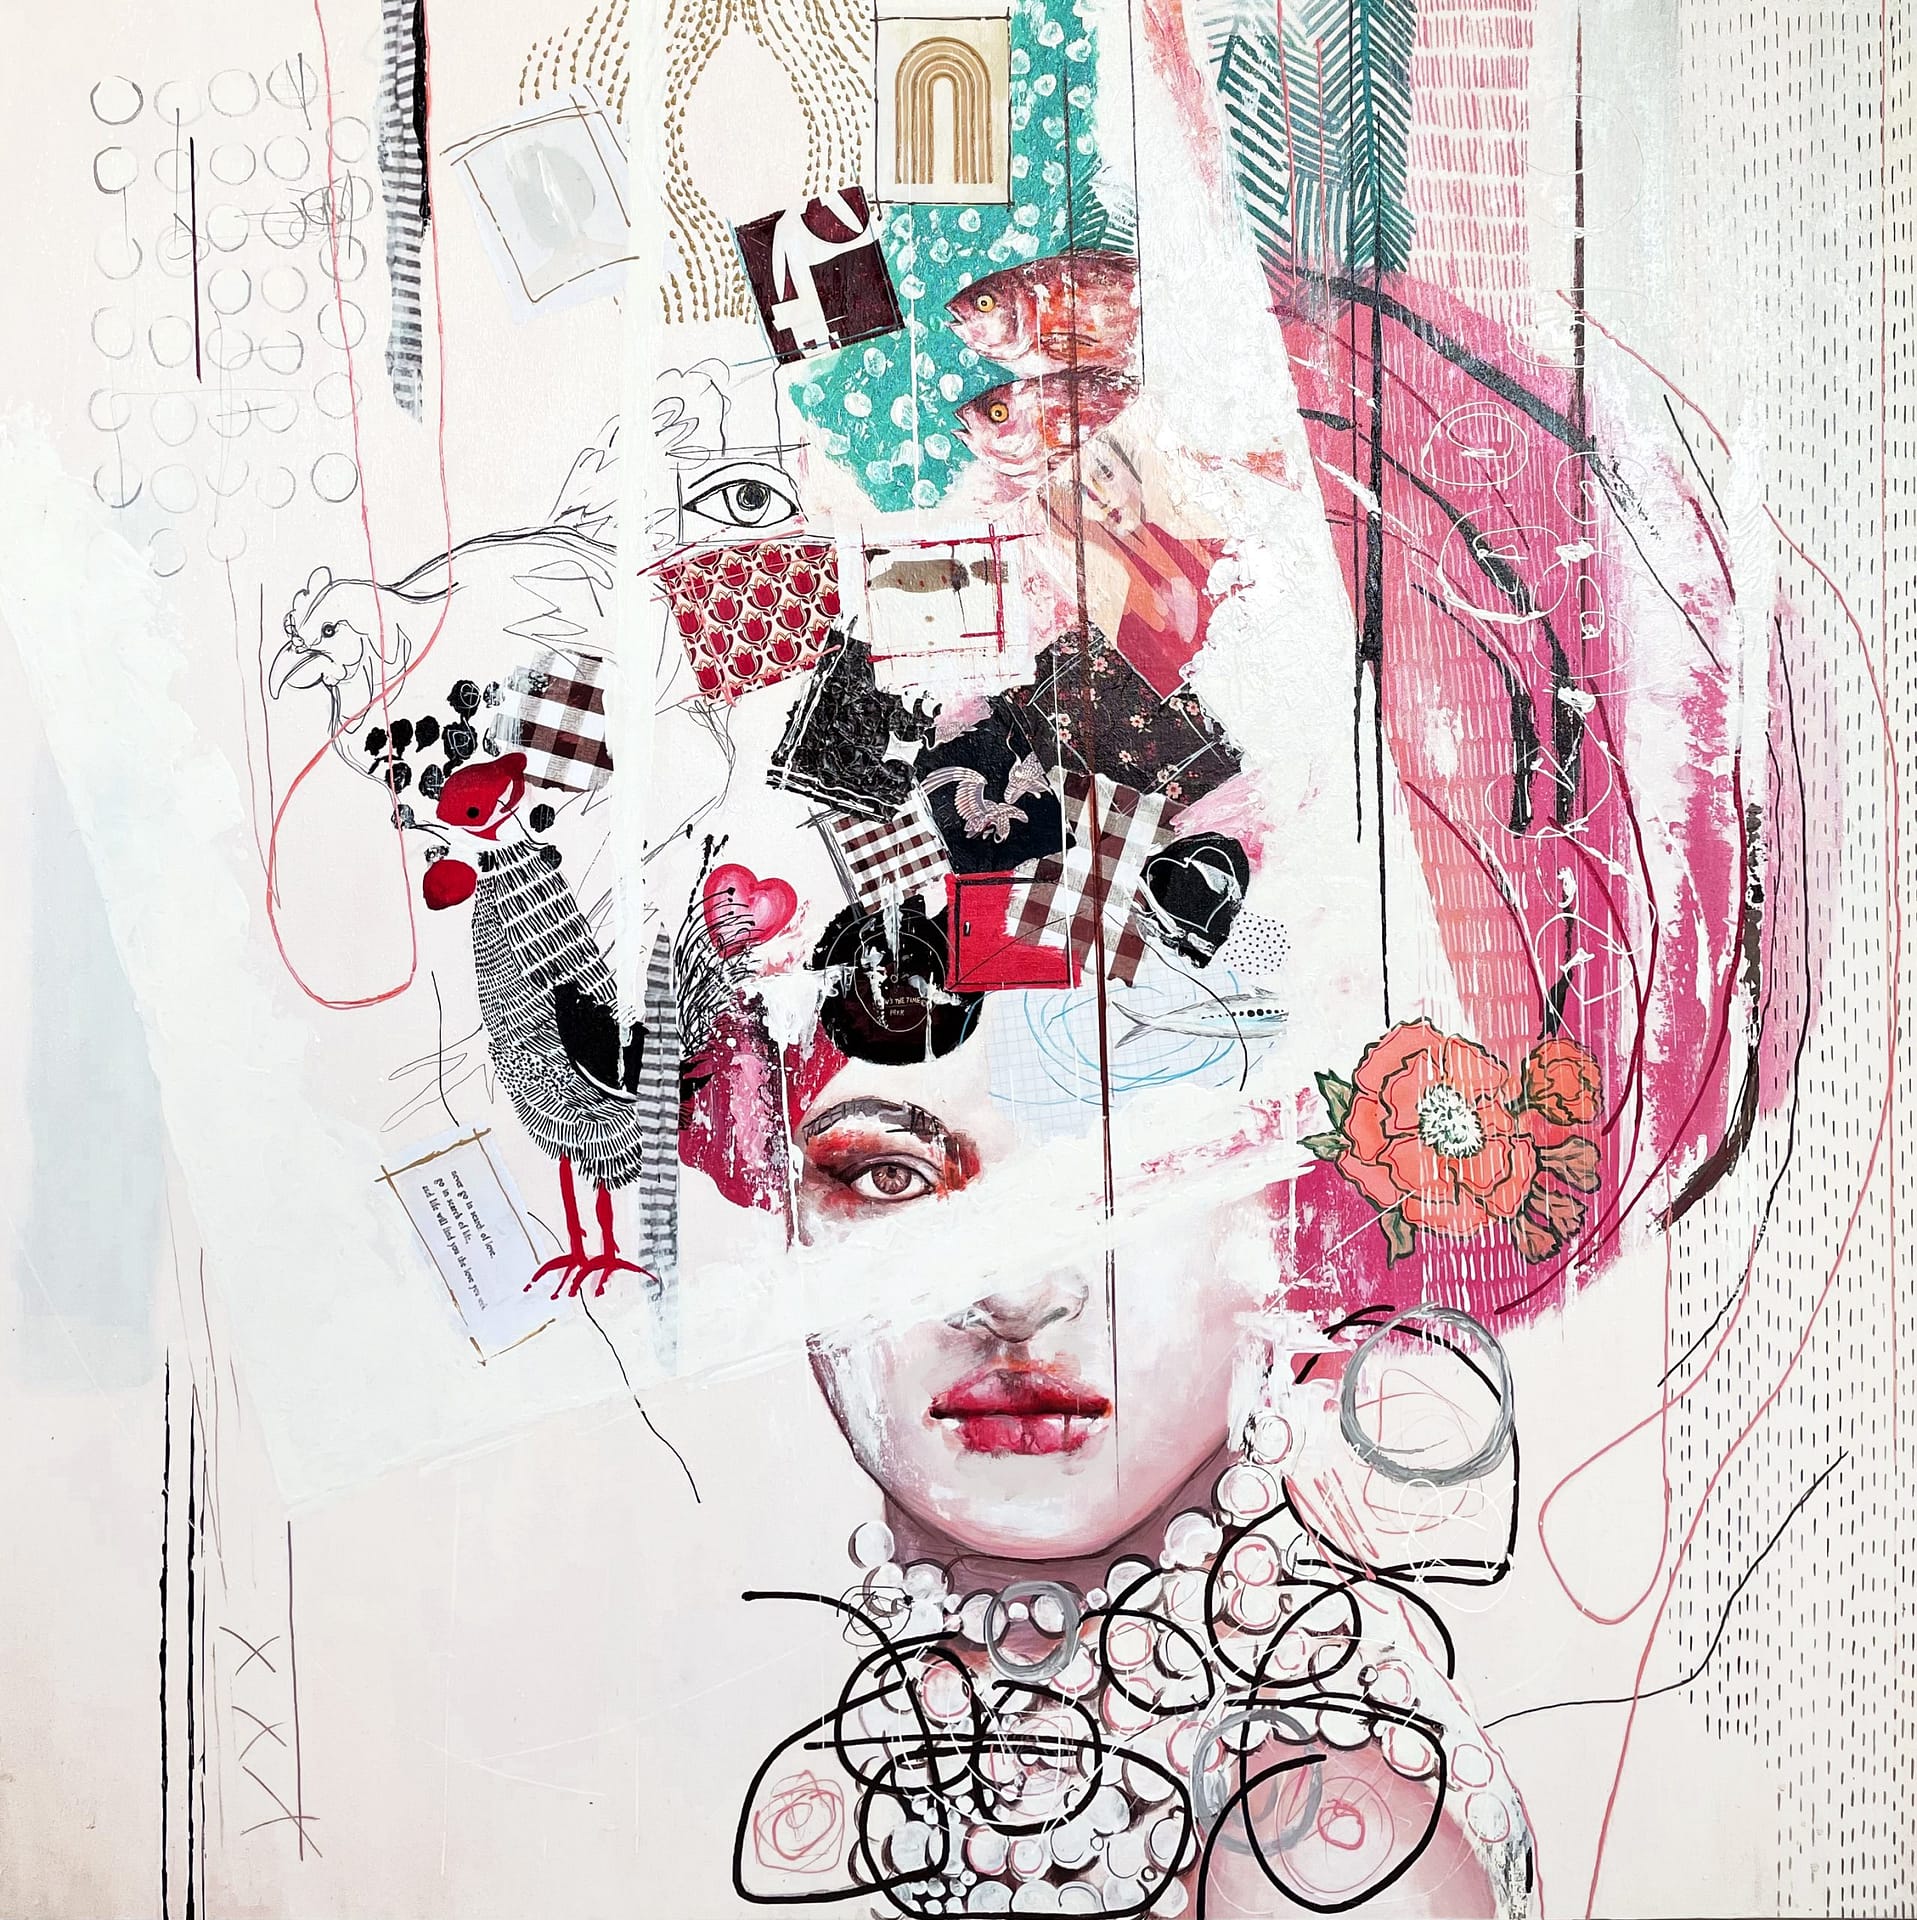 Connecting the dots 130 x 130 cm